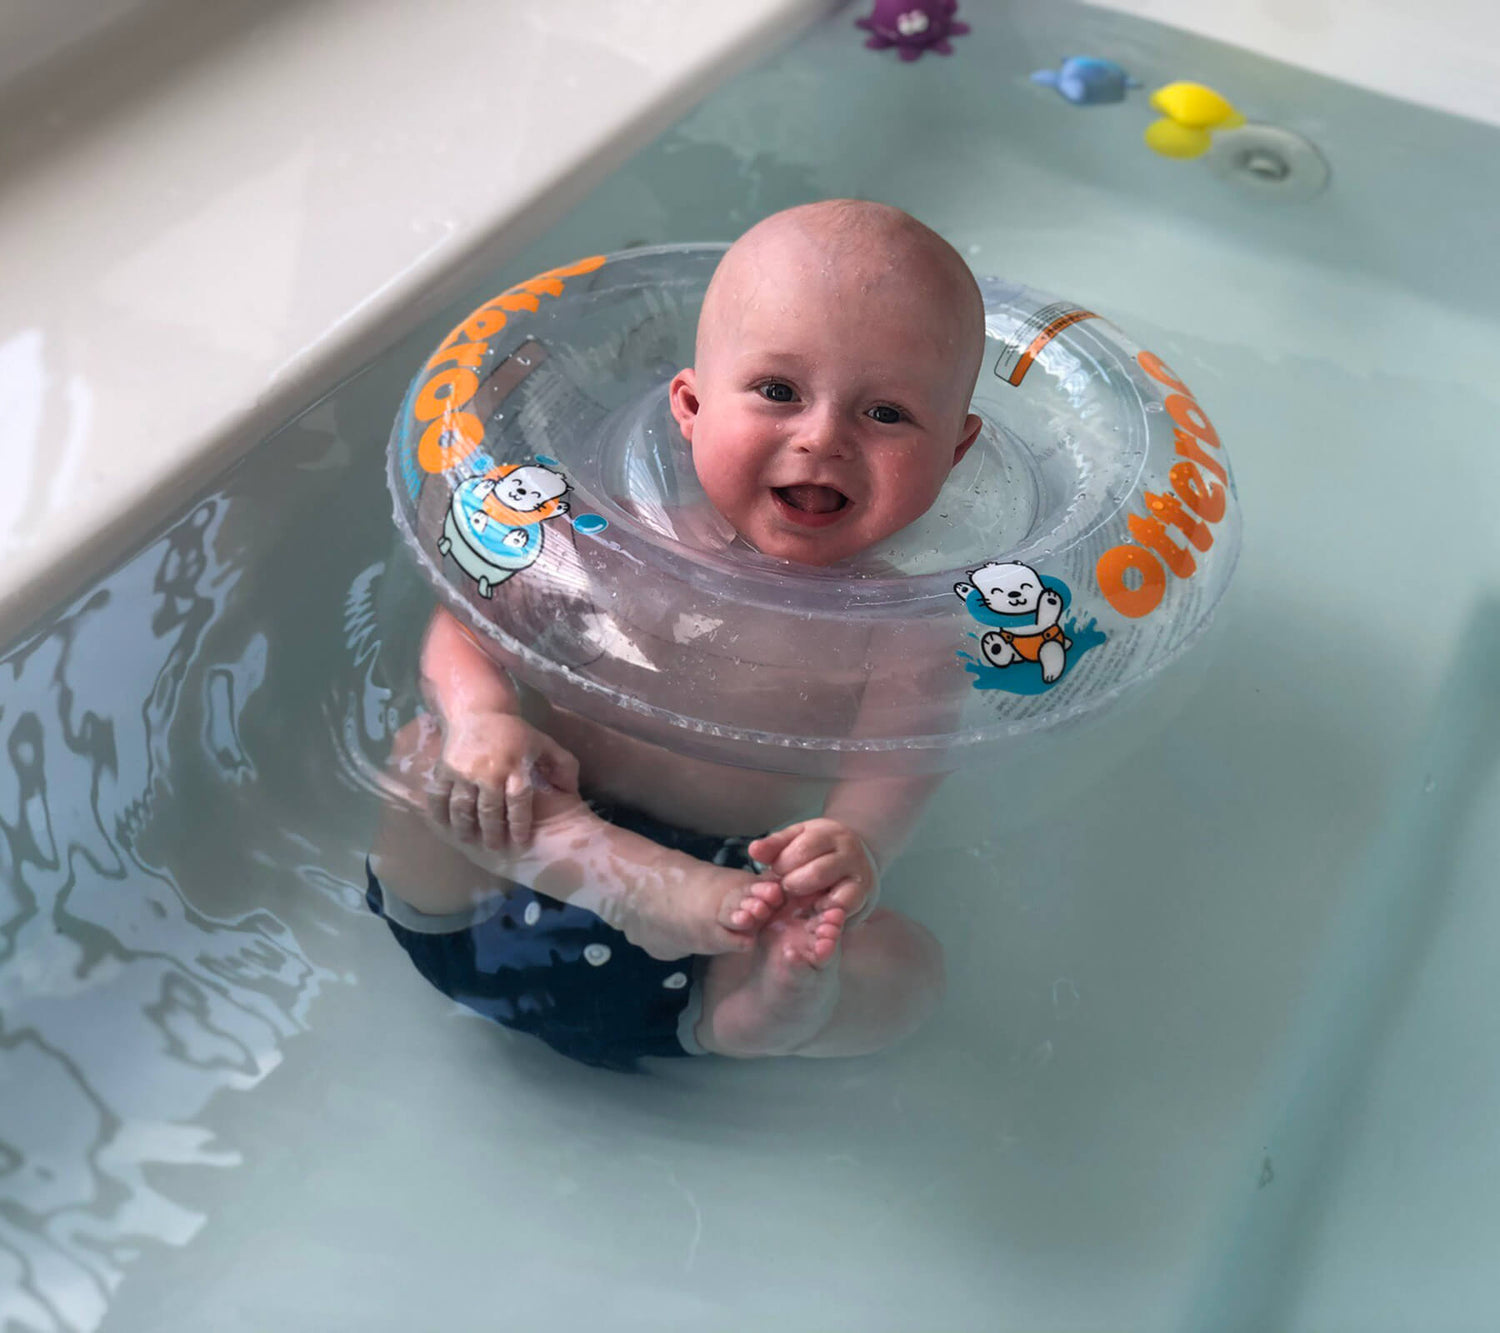 Baby With Congenital Muscular Dystrophy Gains Strength from Moving in Water